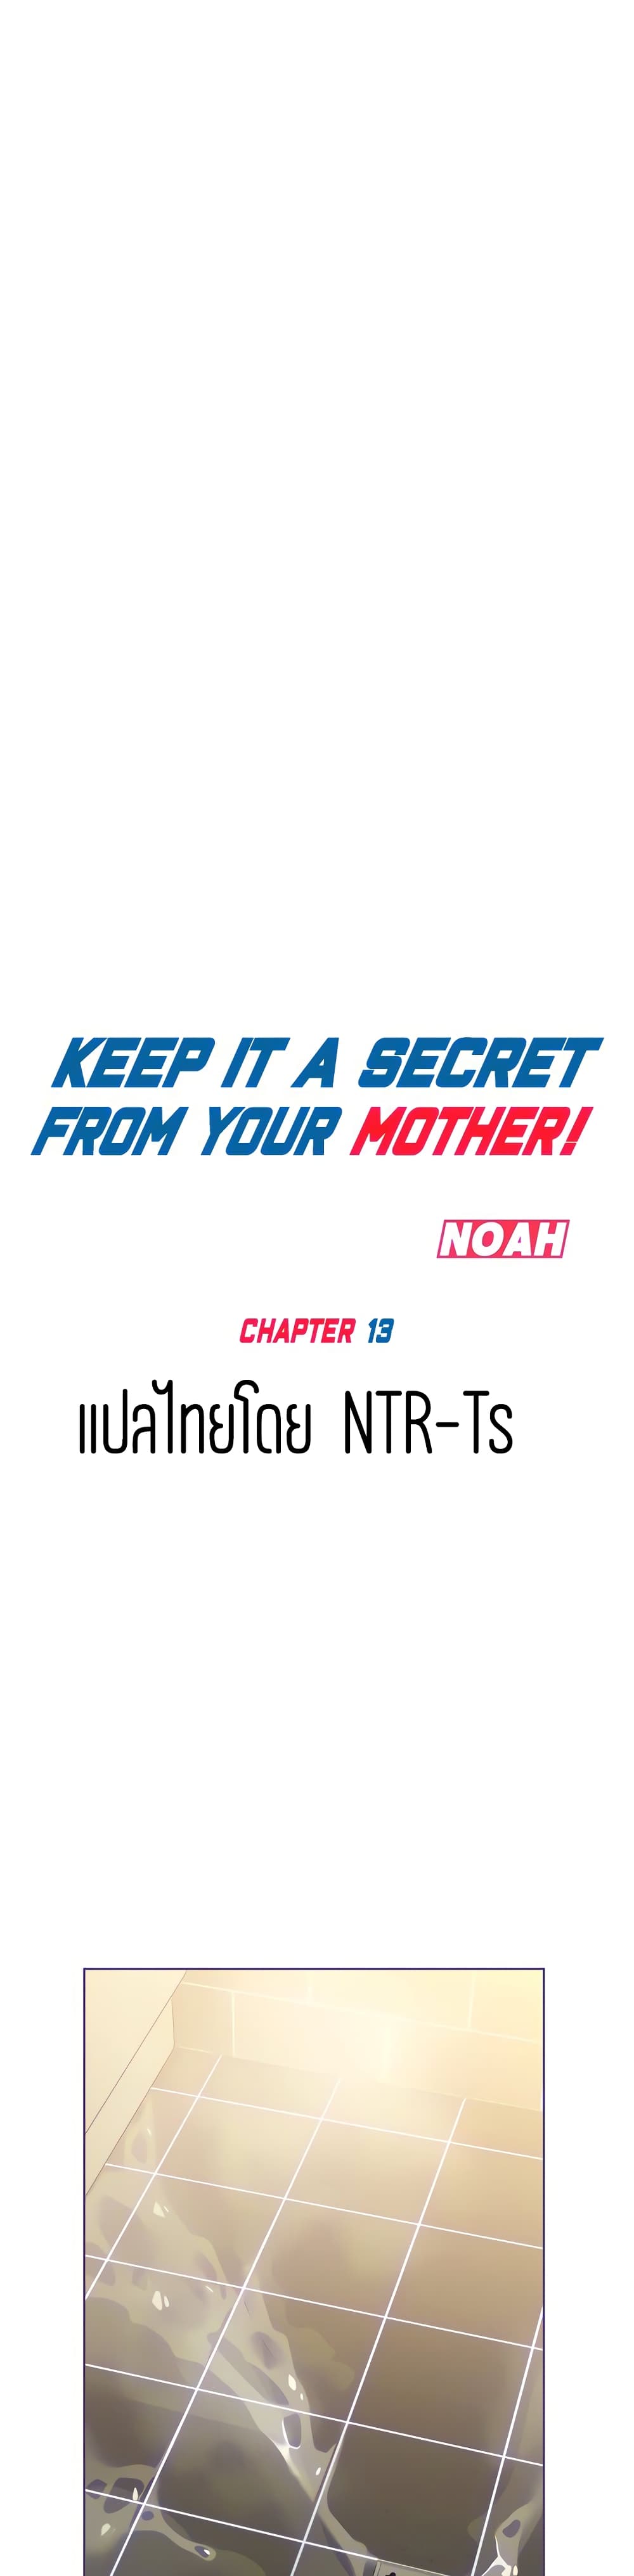 Keep it A Secret from Your Mother! 13-13